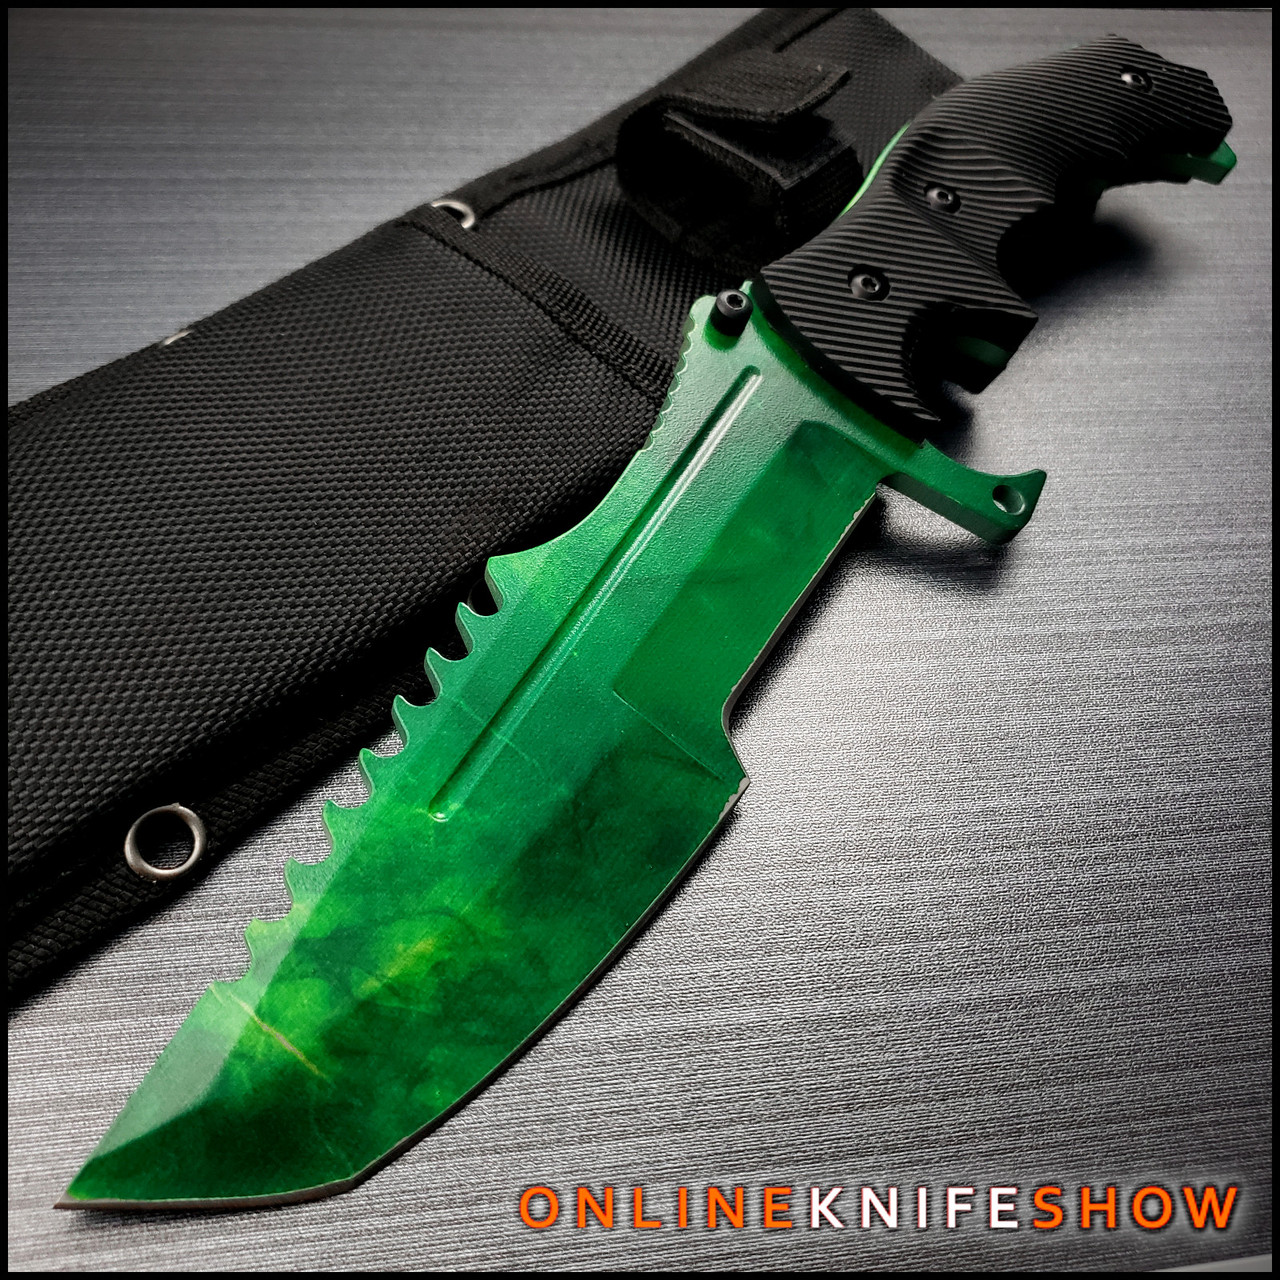 11 CSGO Tactical Hunting Tracker FIXED Blade Survival Bowie Knife RAINBOW  FADE